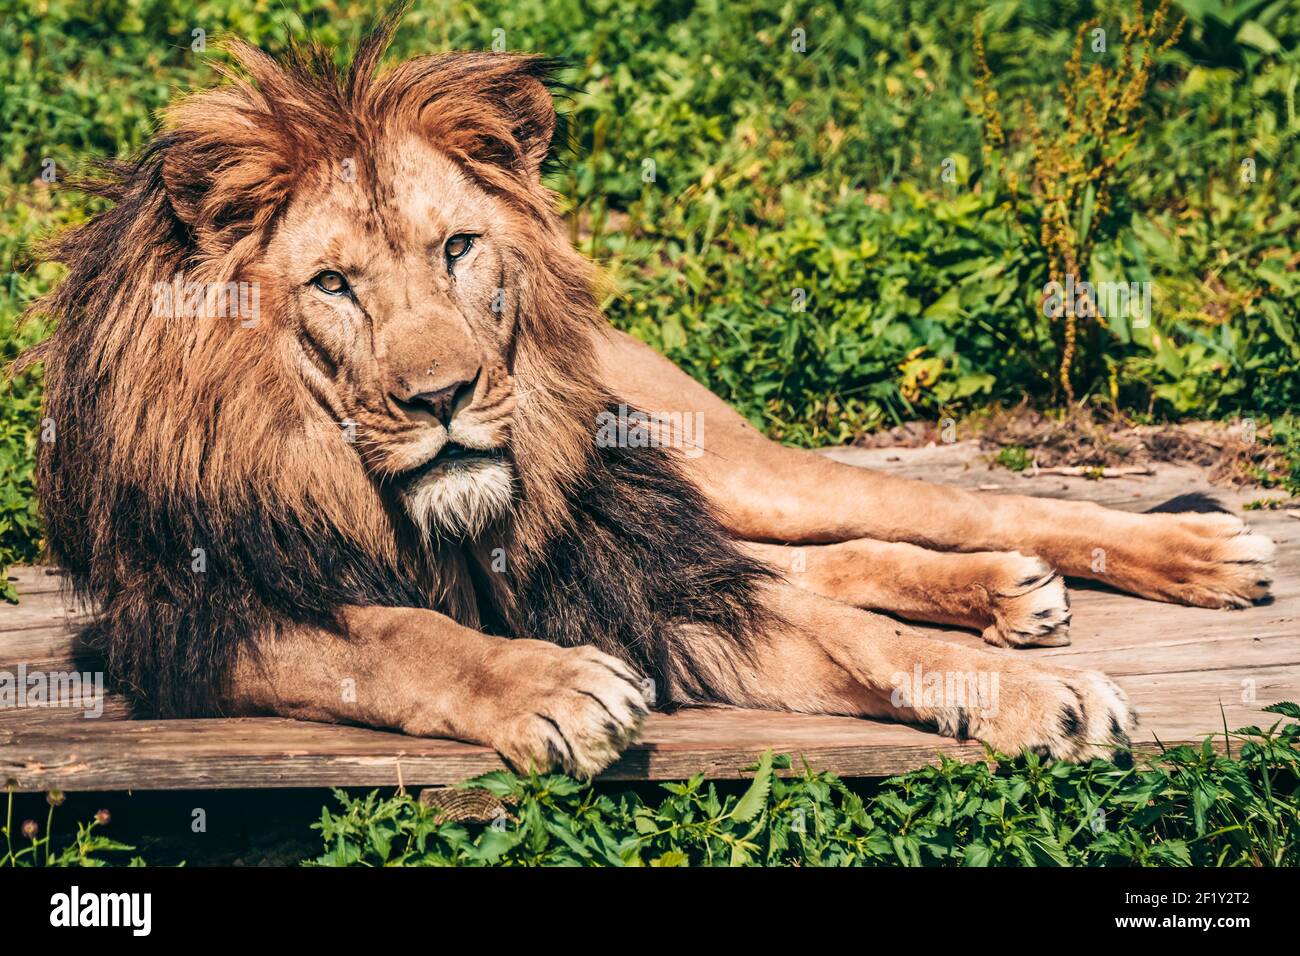 Lion lying on the grass with a calm face expression Stock Photo